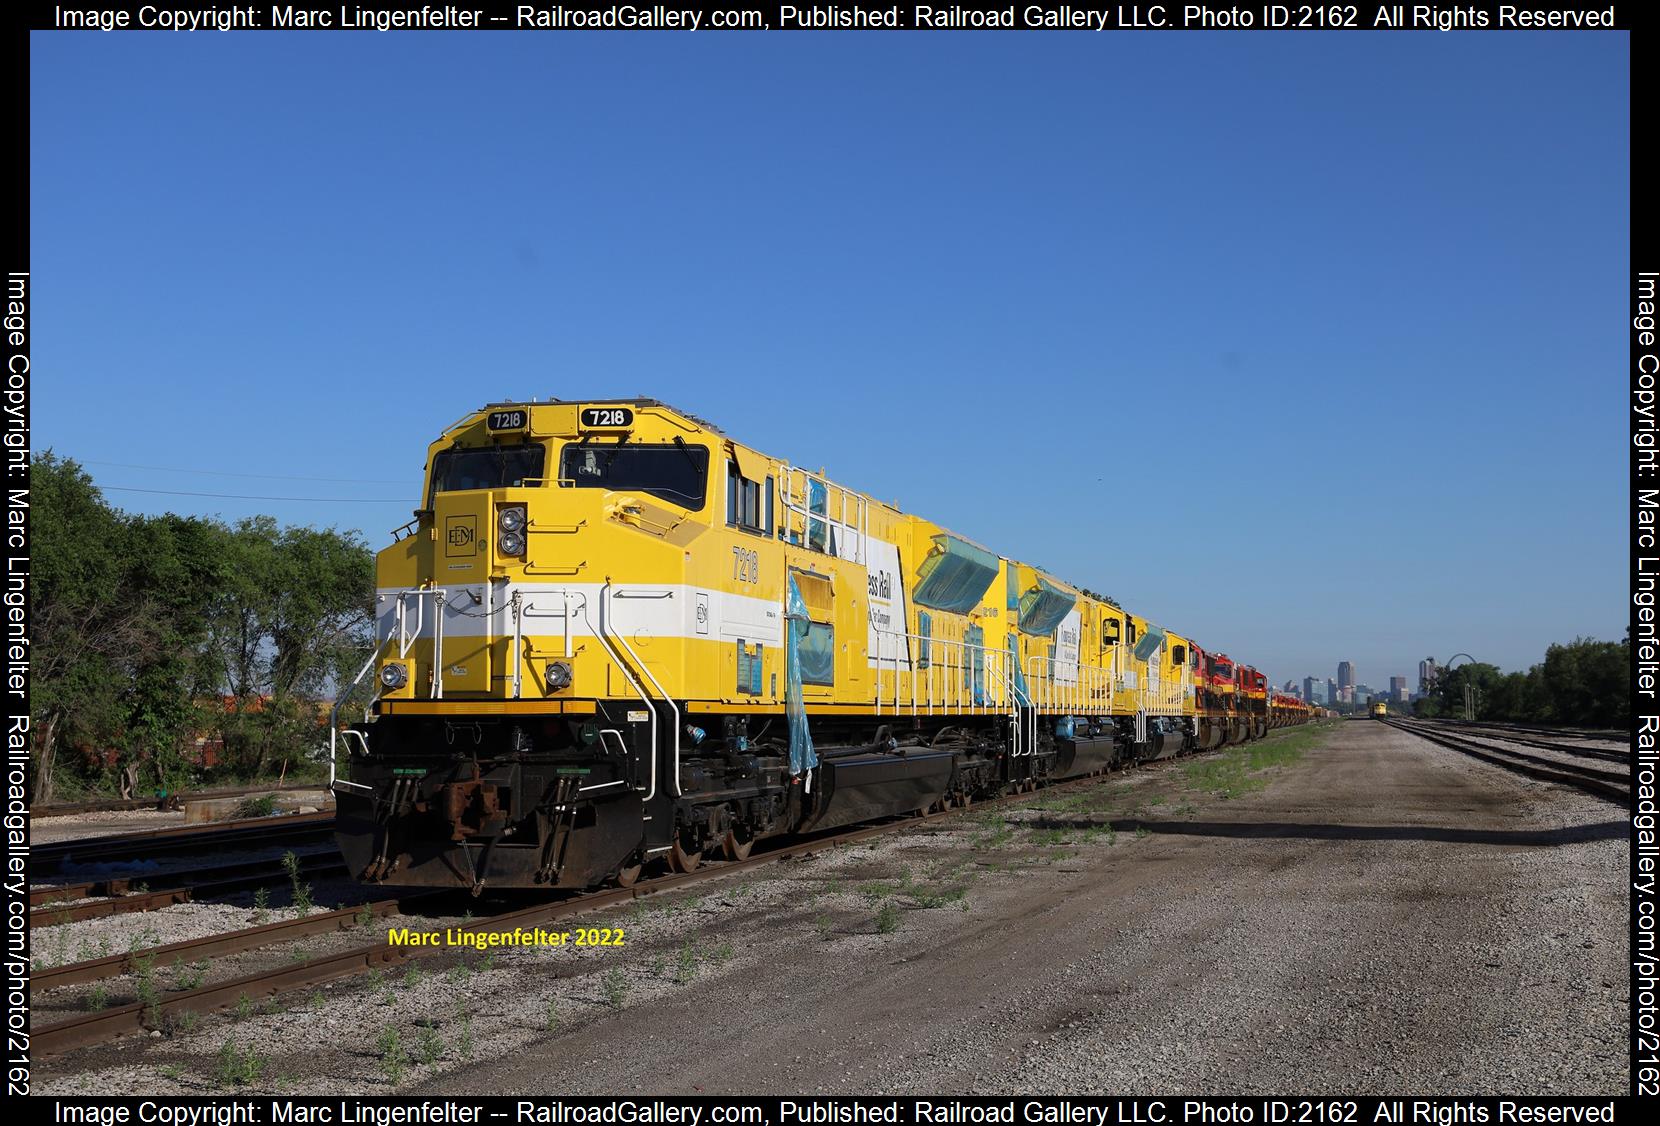 PR 7218 is a class EMD SD70ACe-T4 and  is pictured in East St Louis, Illinois, USA.  This was taken along the Unknown on the Progressive Rail. Photo Copyright: Marc Lingenfelter uploaded to Railroad Gallery on 06/24/2023. This photograph of PR 7218 was taken on Monday, June 20, 2022. All Rights Reserved. 